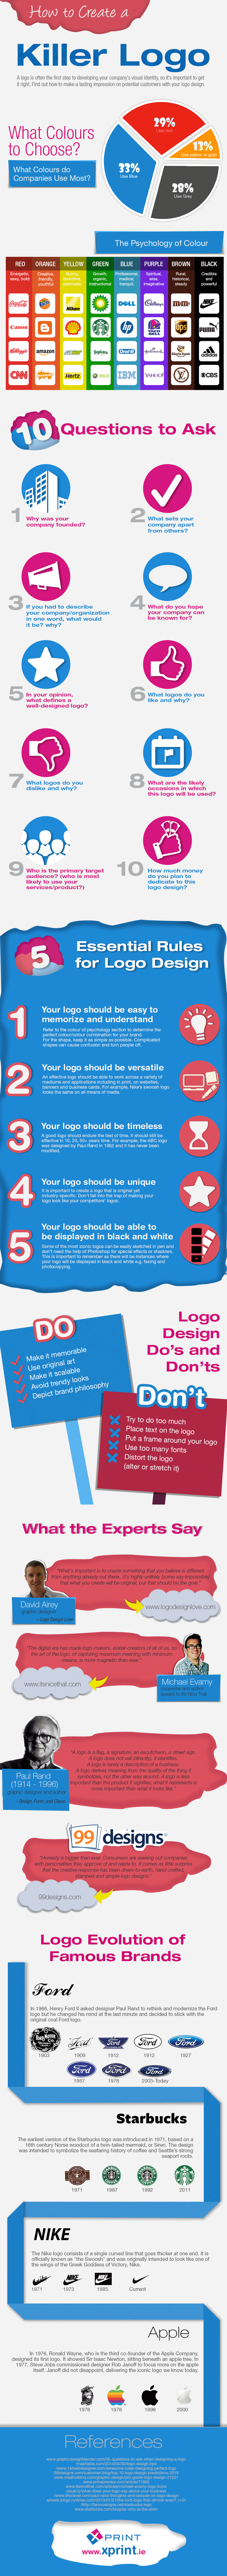 How-to-create-a-killer-logo-An-Infographic